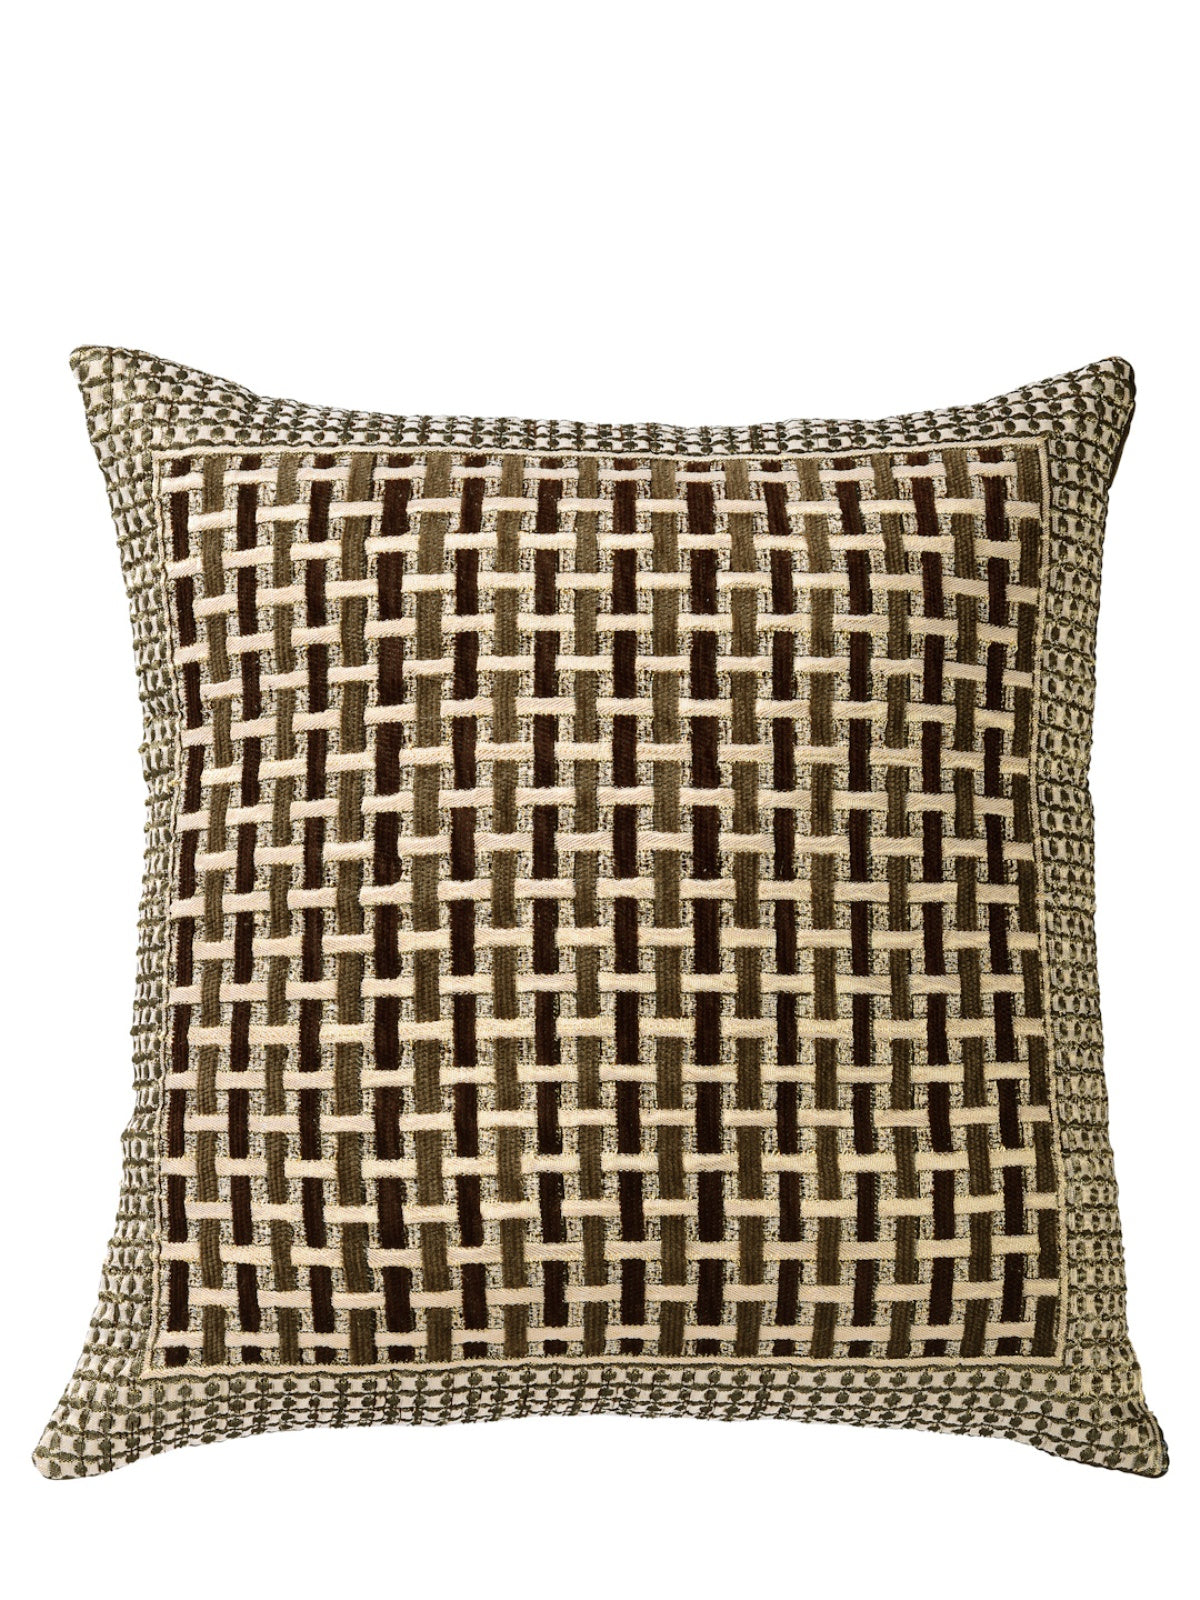 Soft Chenille Geometric Throw Pillow/Cushion Covers 16x16 Set of 5 - Brown